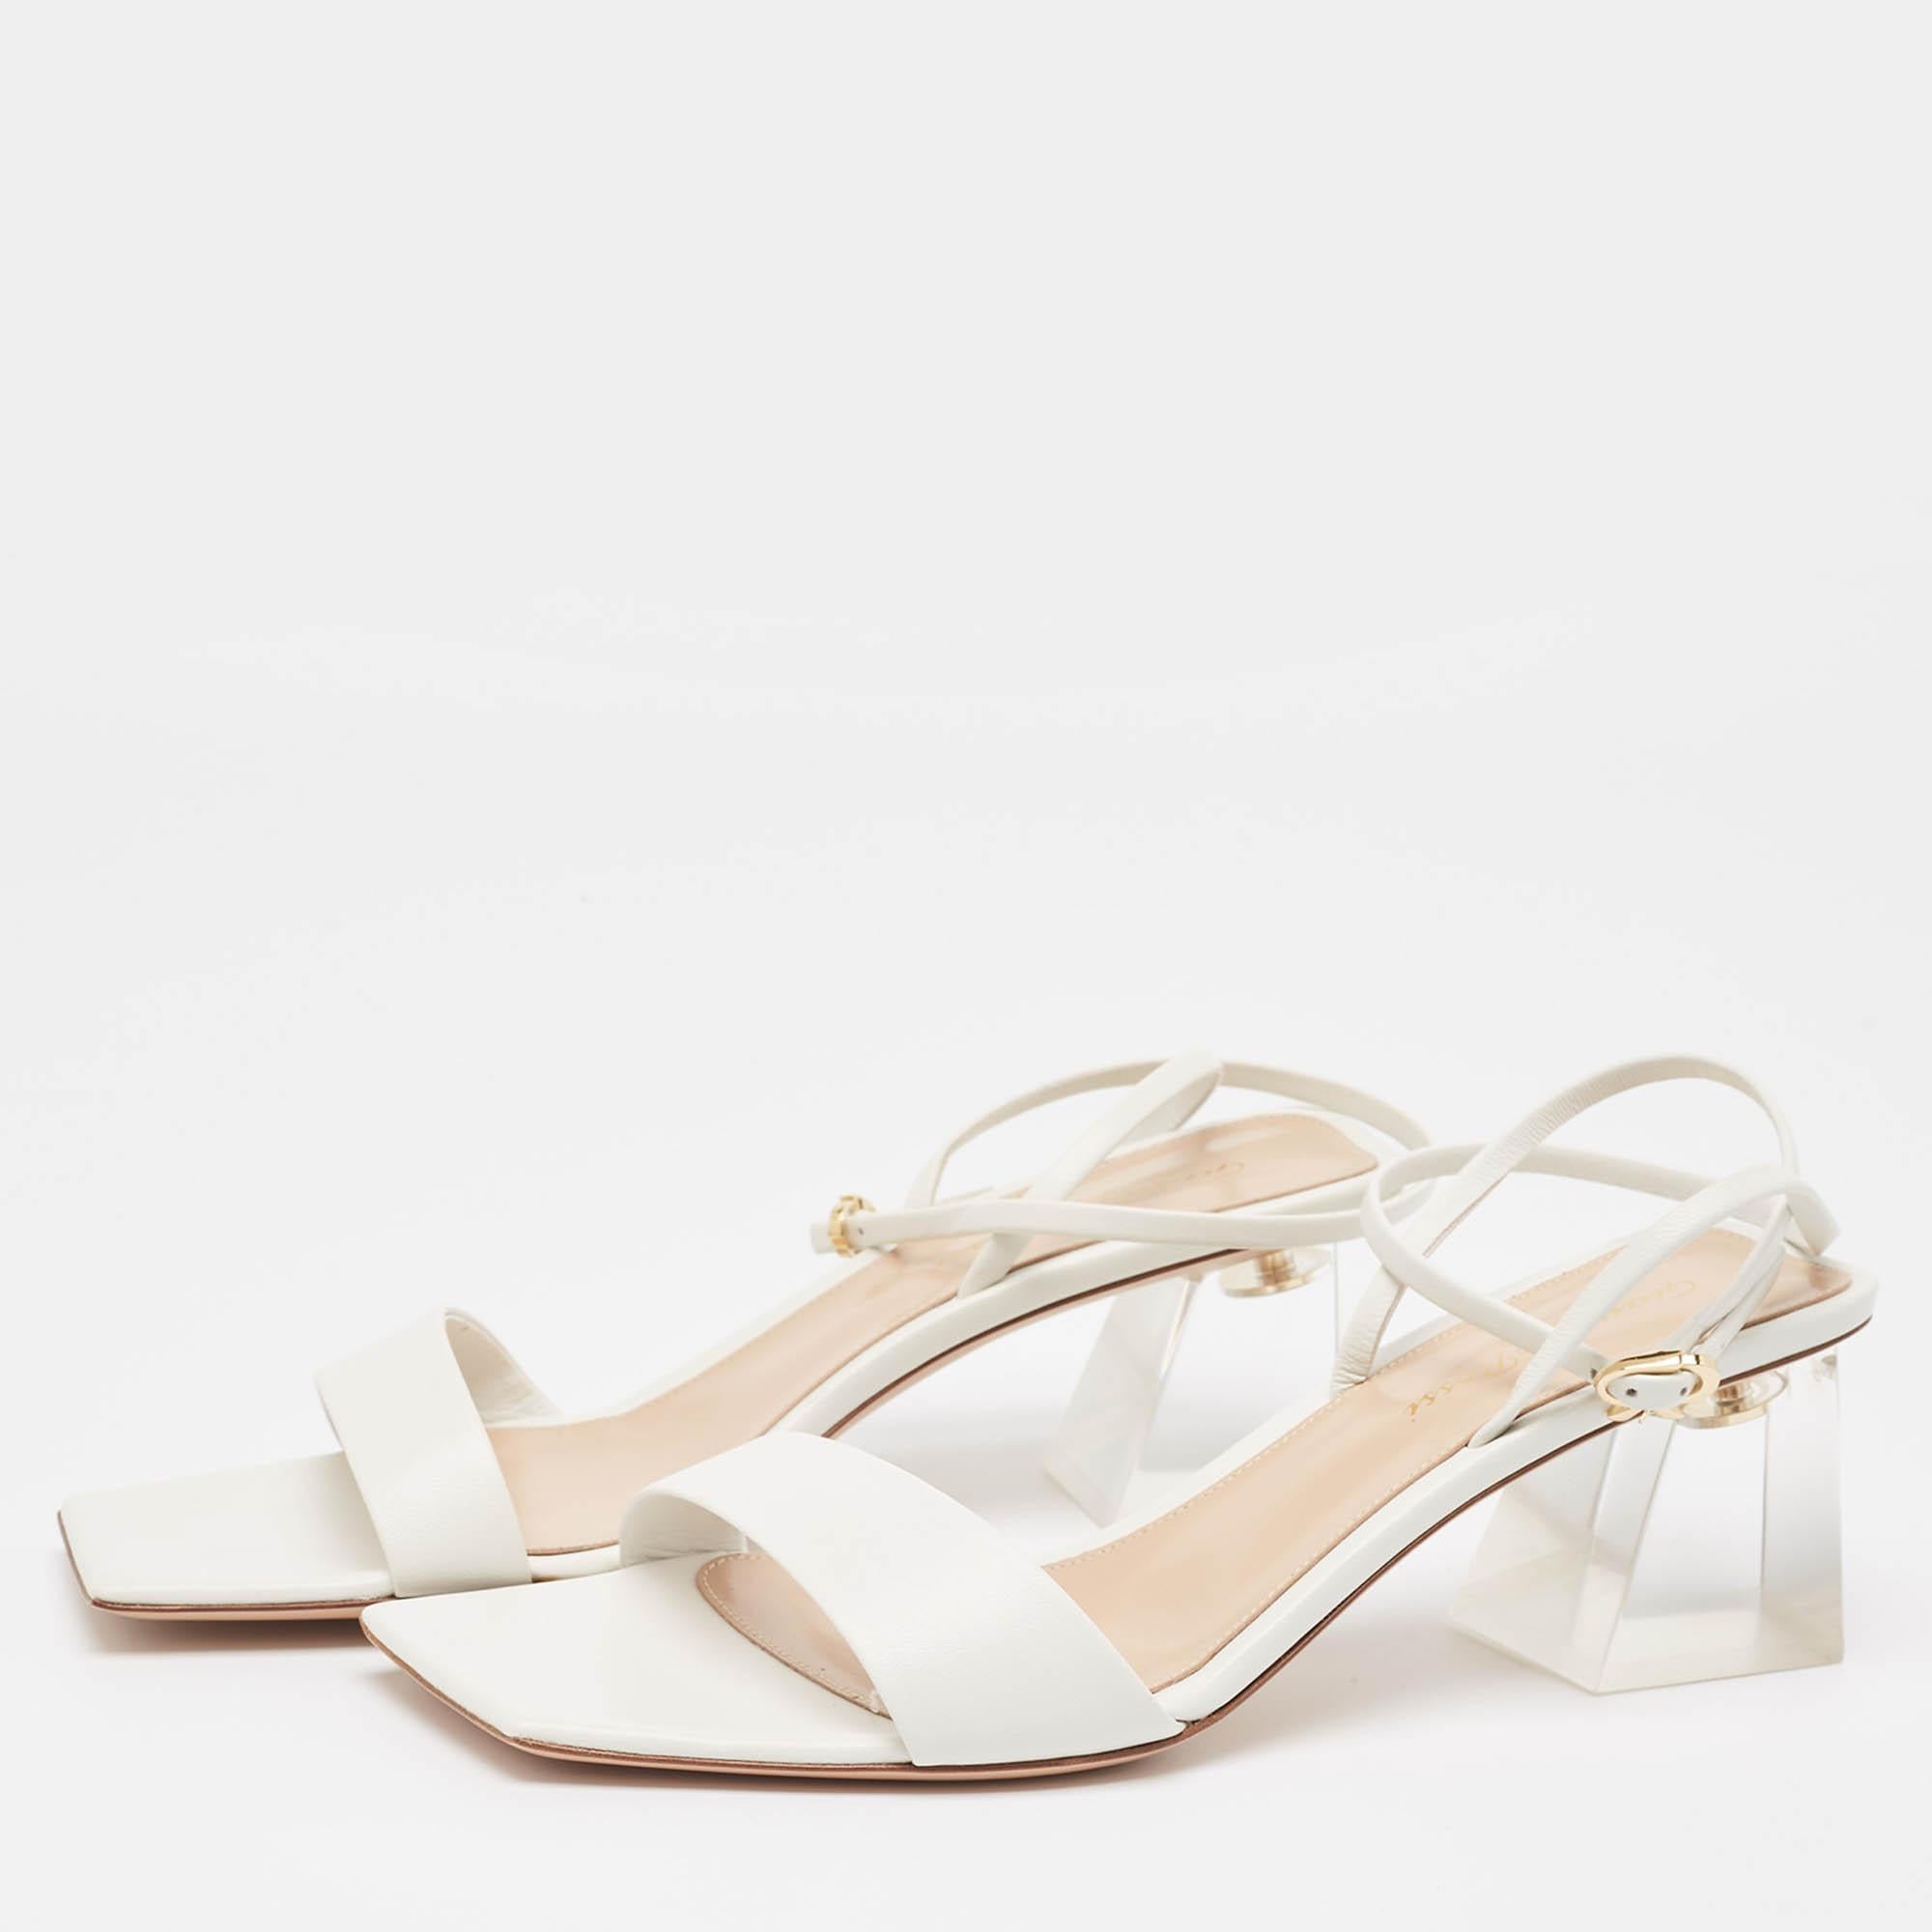 Gianvito Rossi White Leather Cosmic Sandals Size 39 For Sale 2